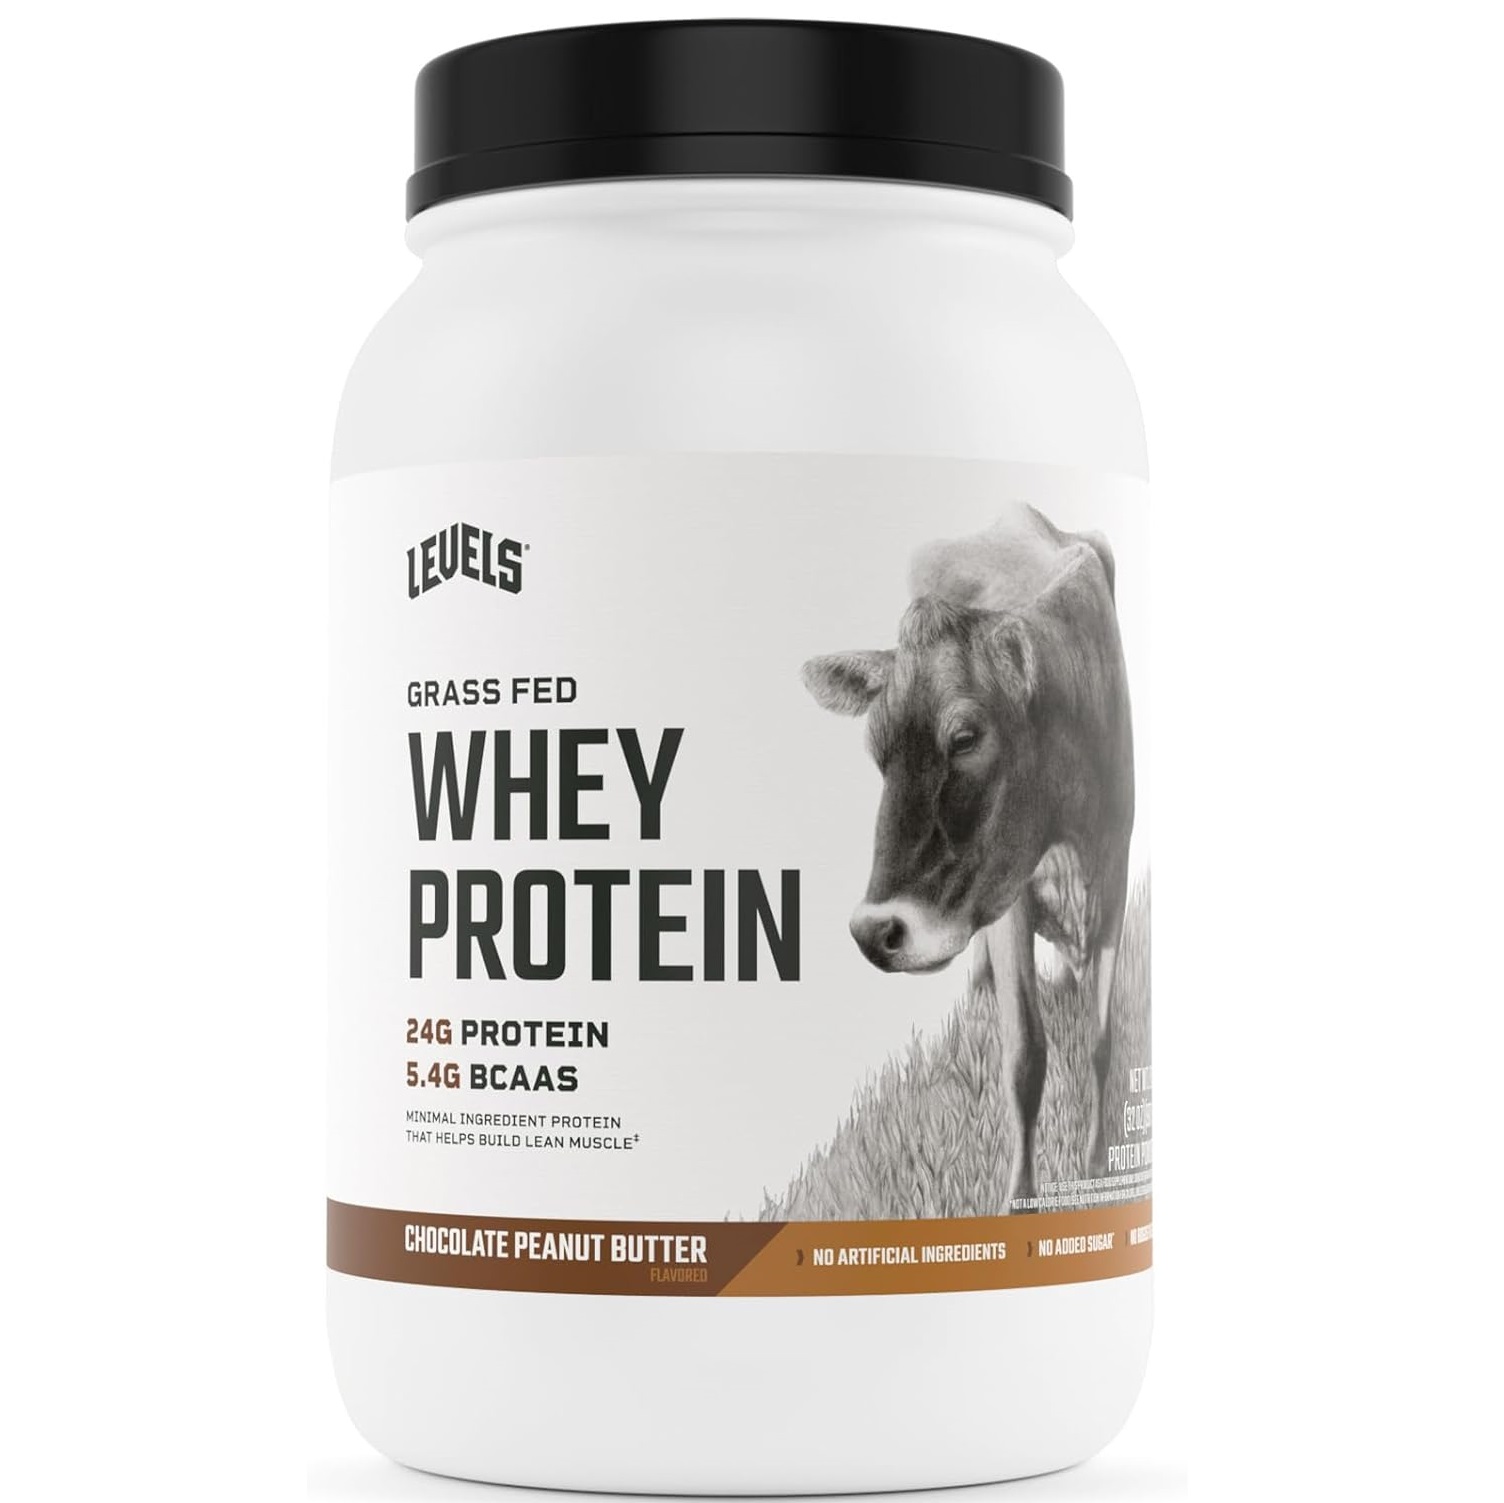 Levels-Grass-Fed-100-Whey-Protein